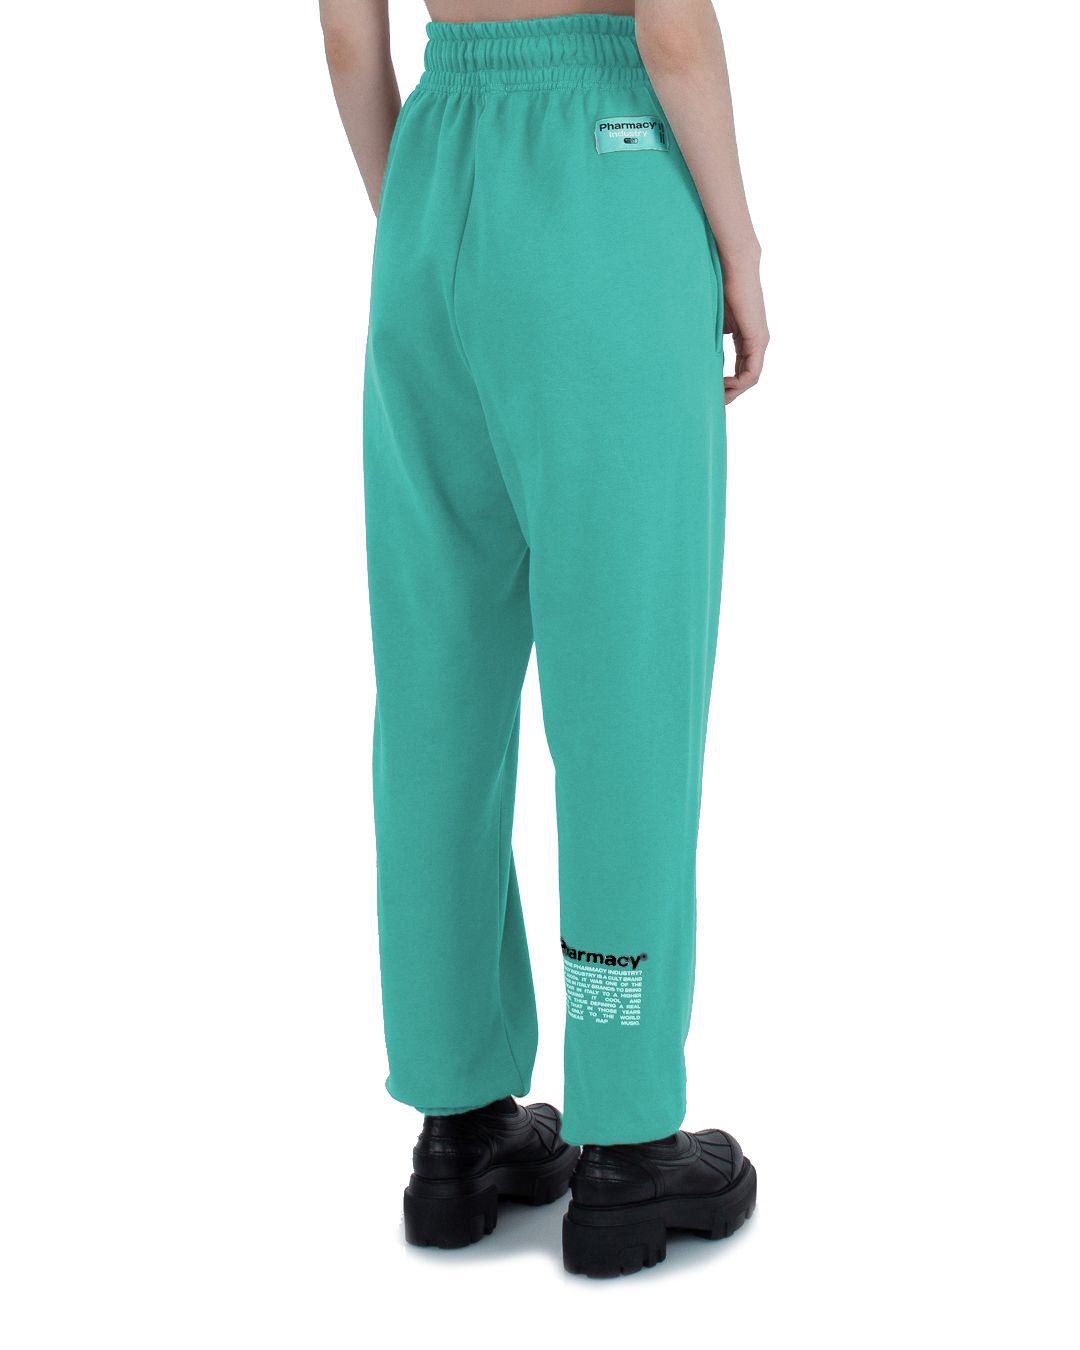 Pharmacy Industry Green Cotton Jeans & Pant